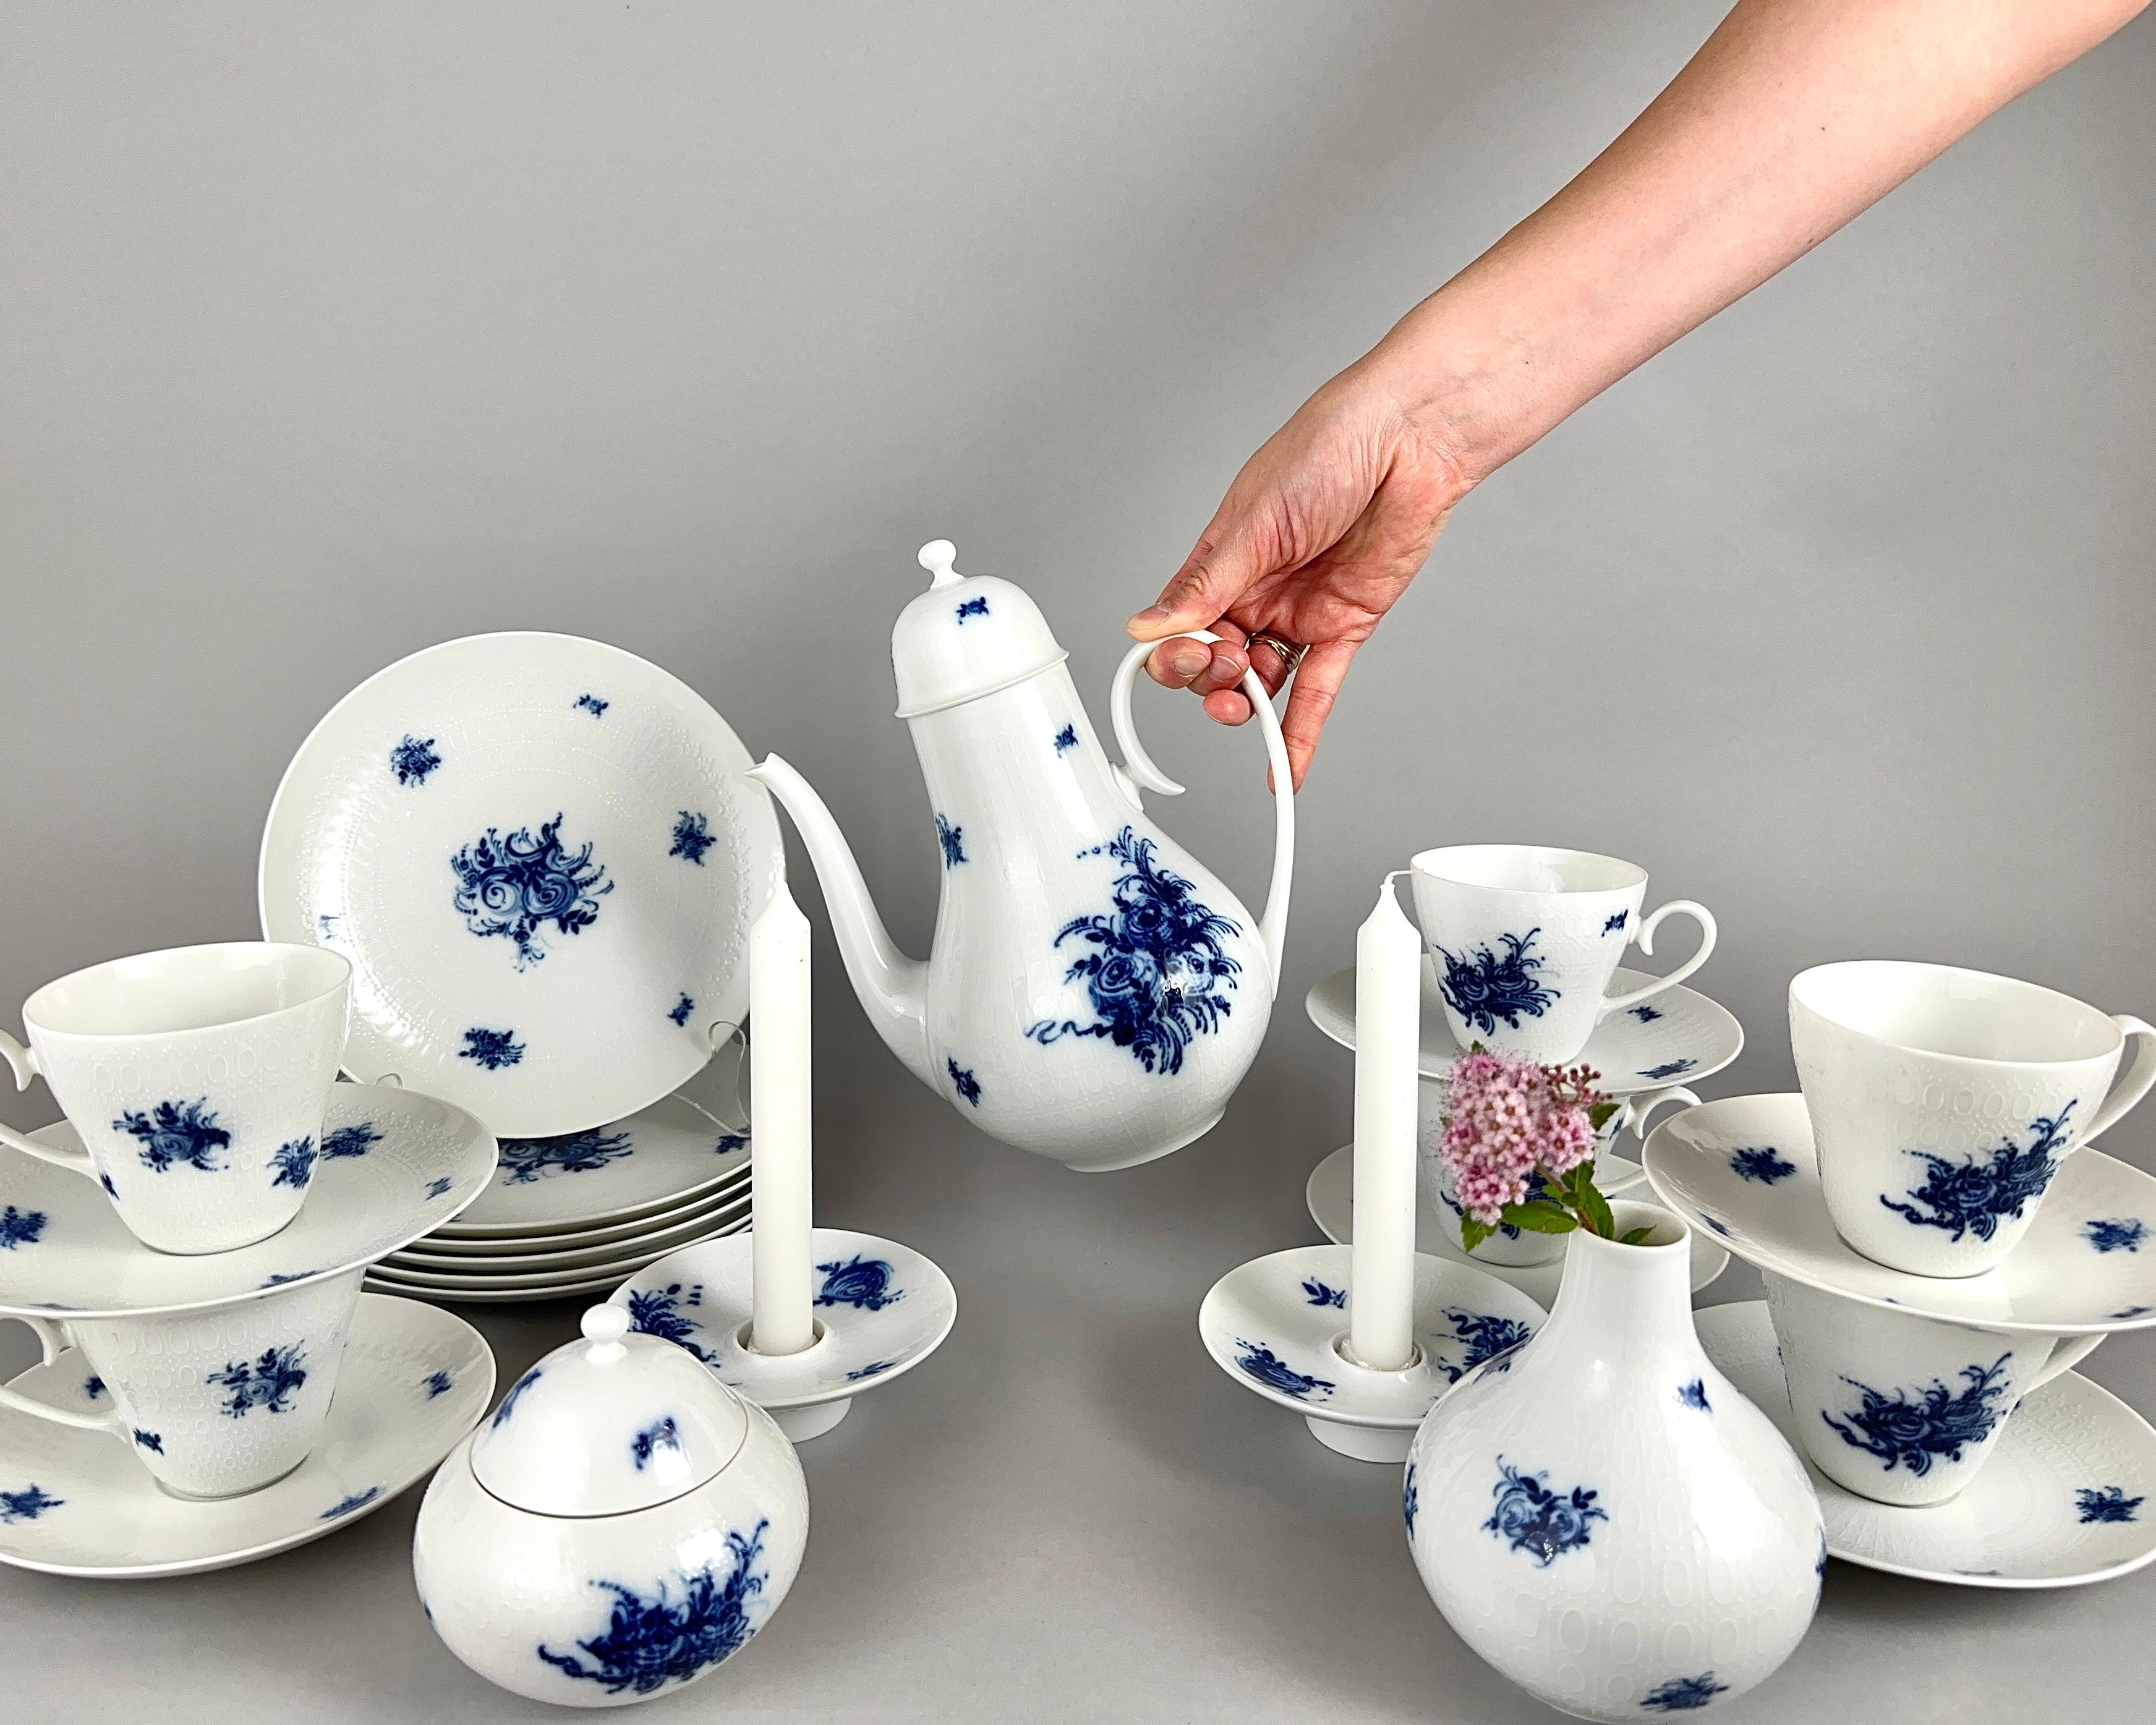 Björn Wiinblad for Rosenthal - Studio Linie, Germany coffee or tea set.

Large vintage German service of the famous Rosenthal Linie factory from Germany.

A very elegant service in blue and white.

The porcelain parts all have a beautiful blue